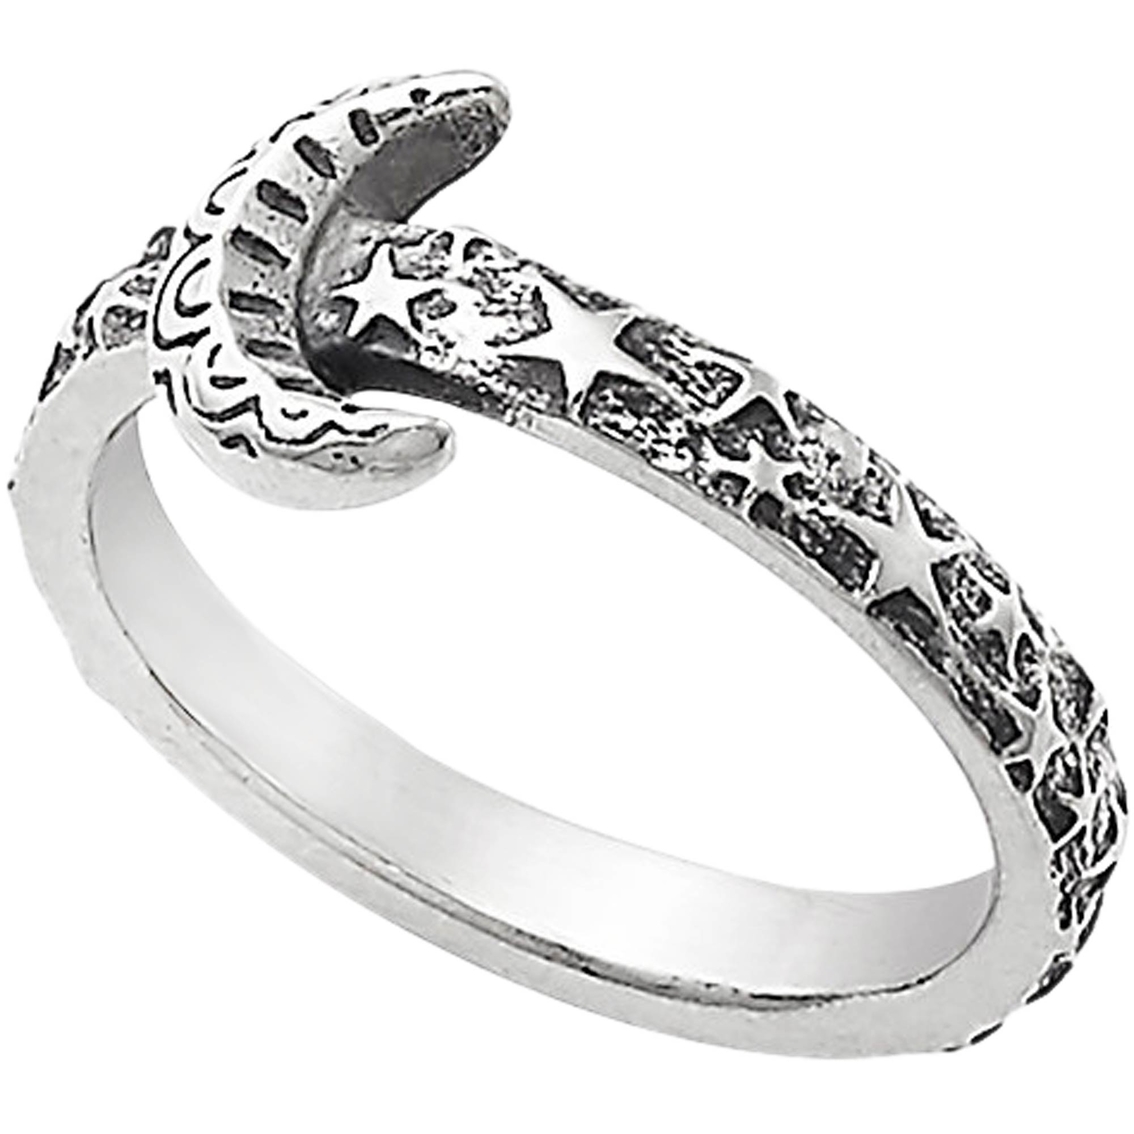 James Avery Starry Night Ring Silver Rings Jewelry & Watches Shop